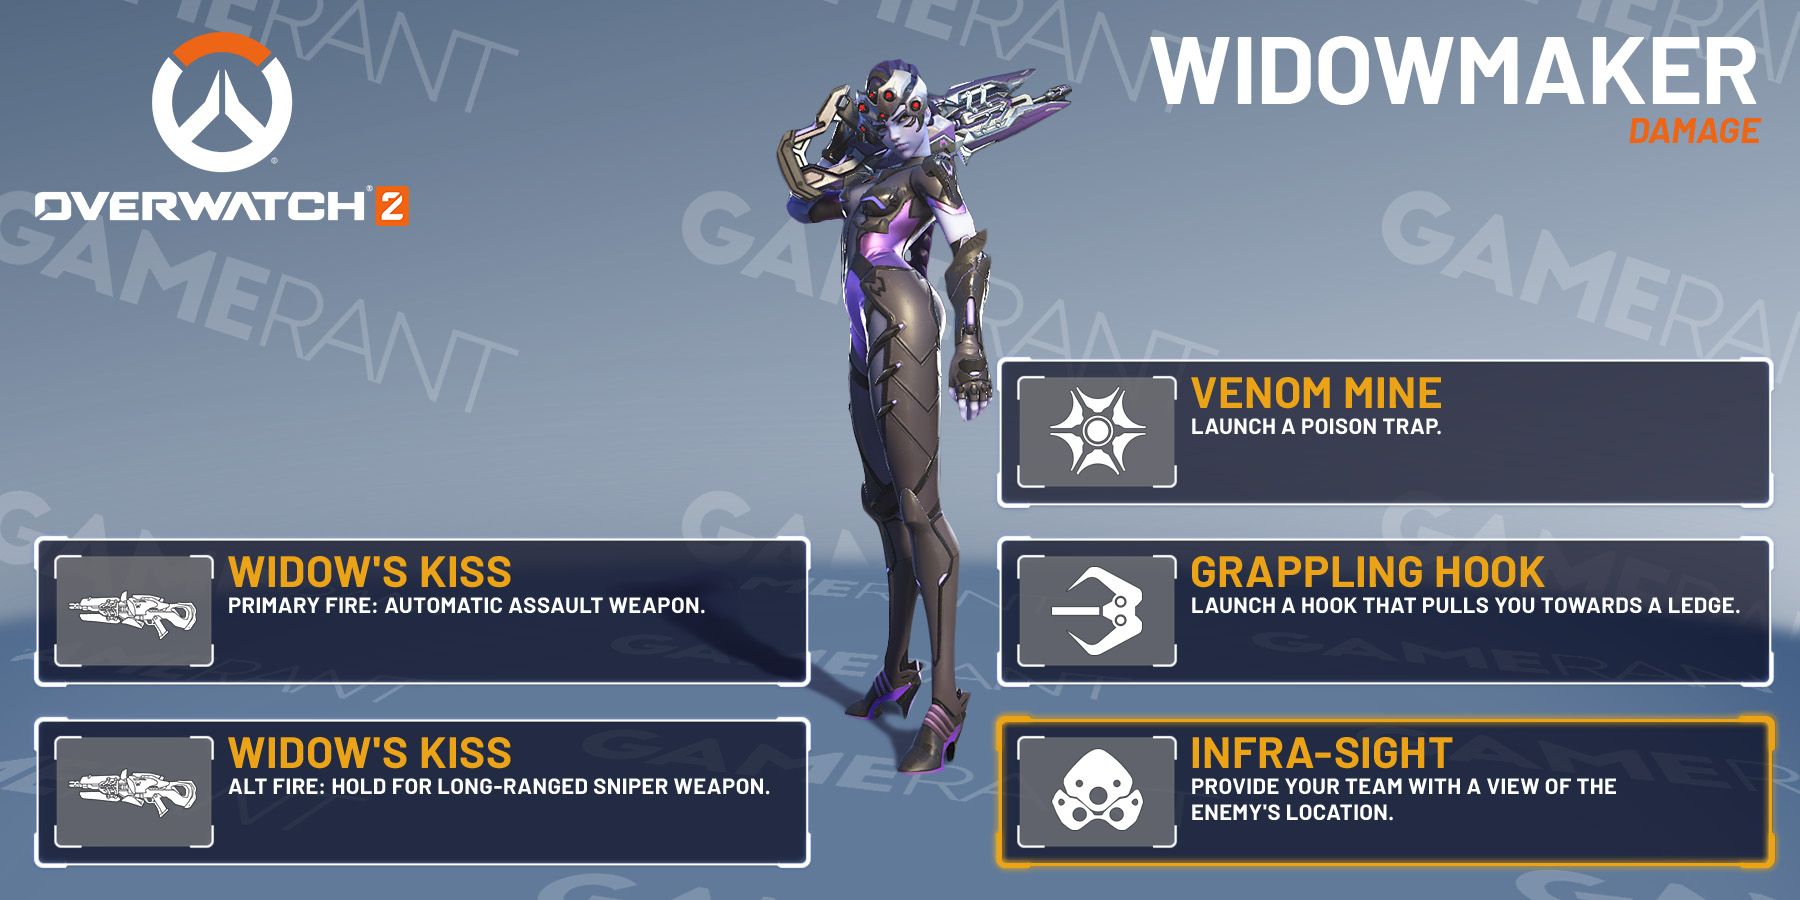 Overwatch 2: Widomaker Guide (Tips, Abilities, And More)